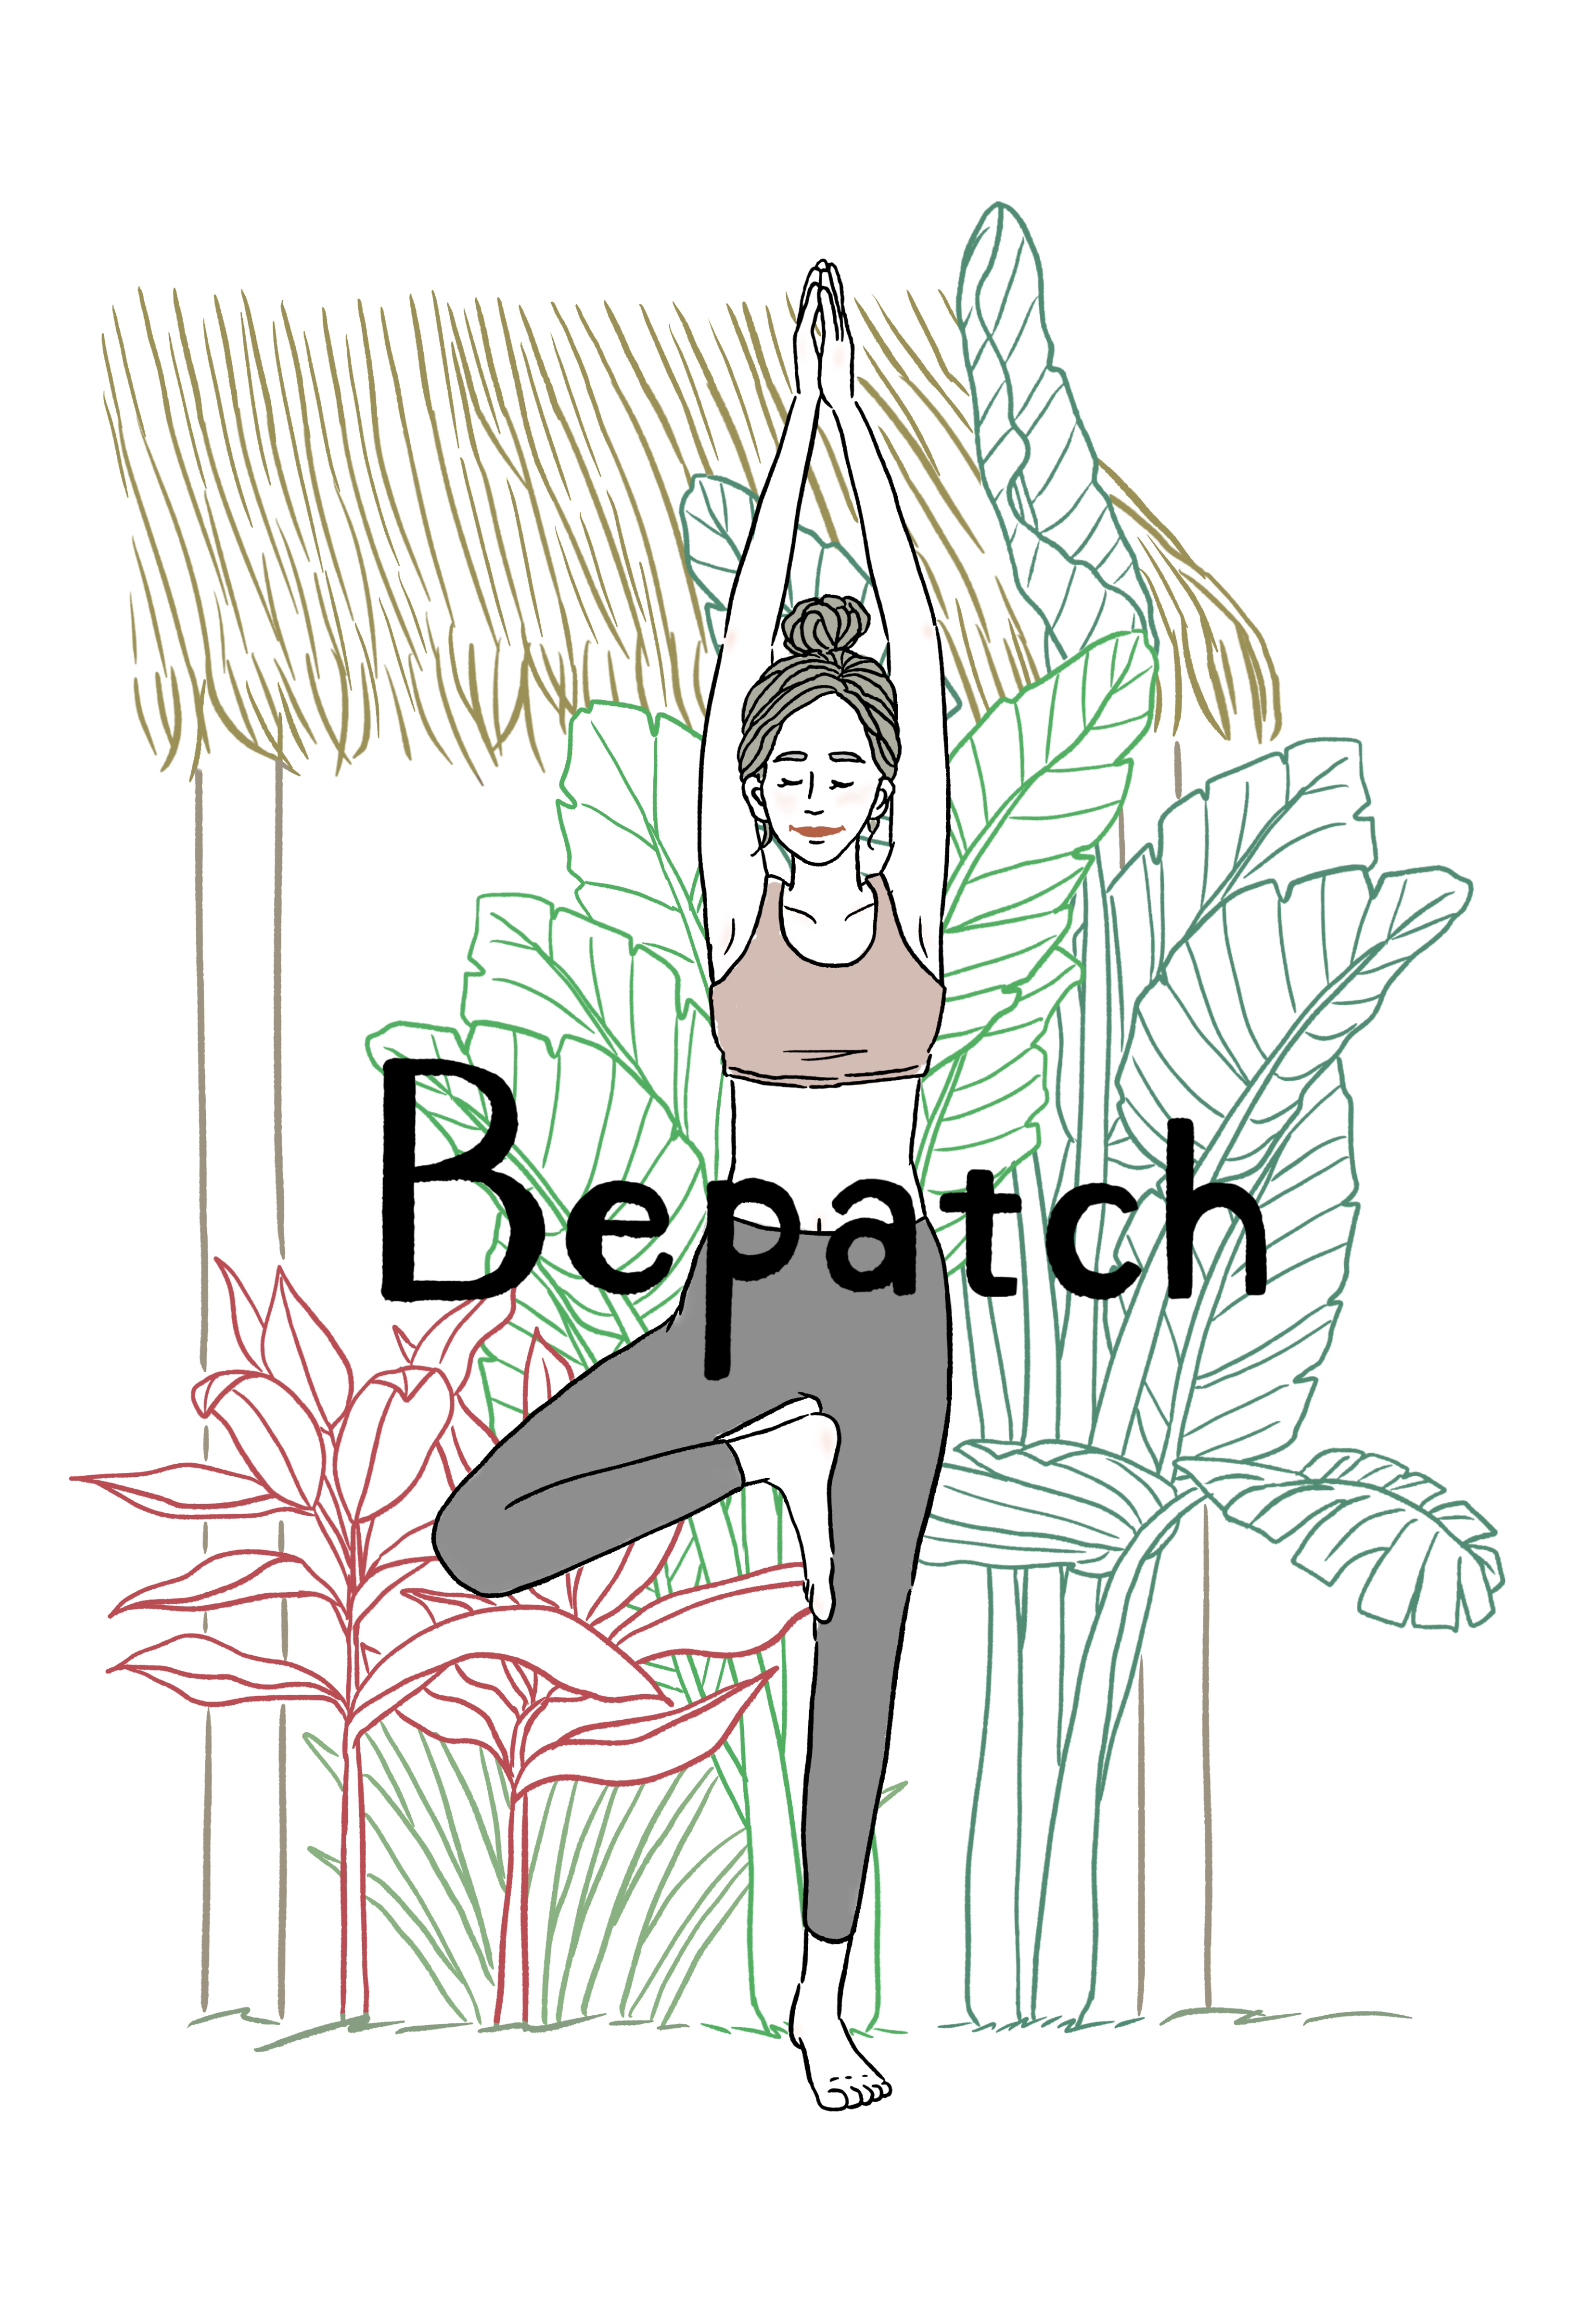 Bepatchの画像です